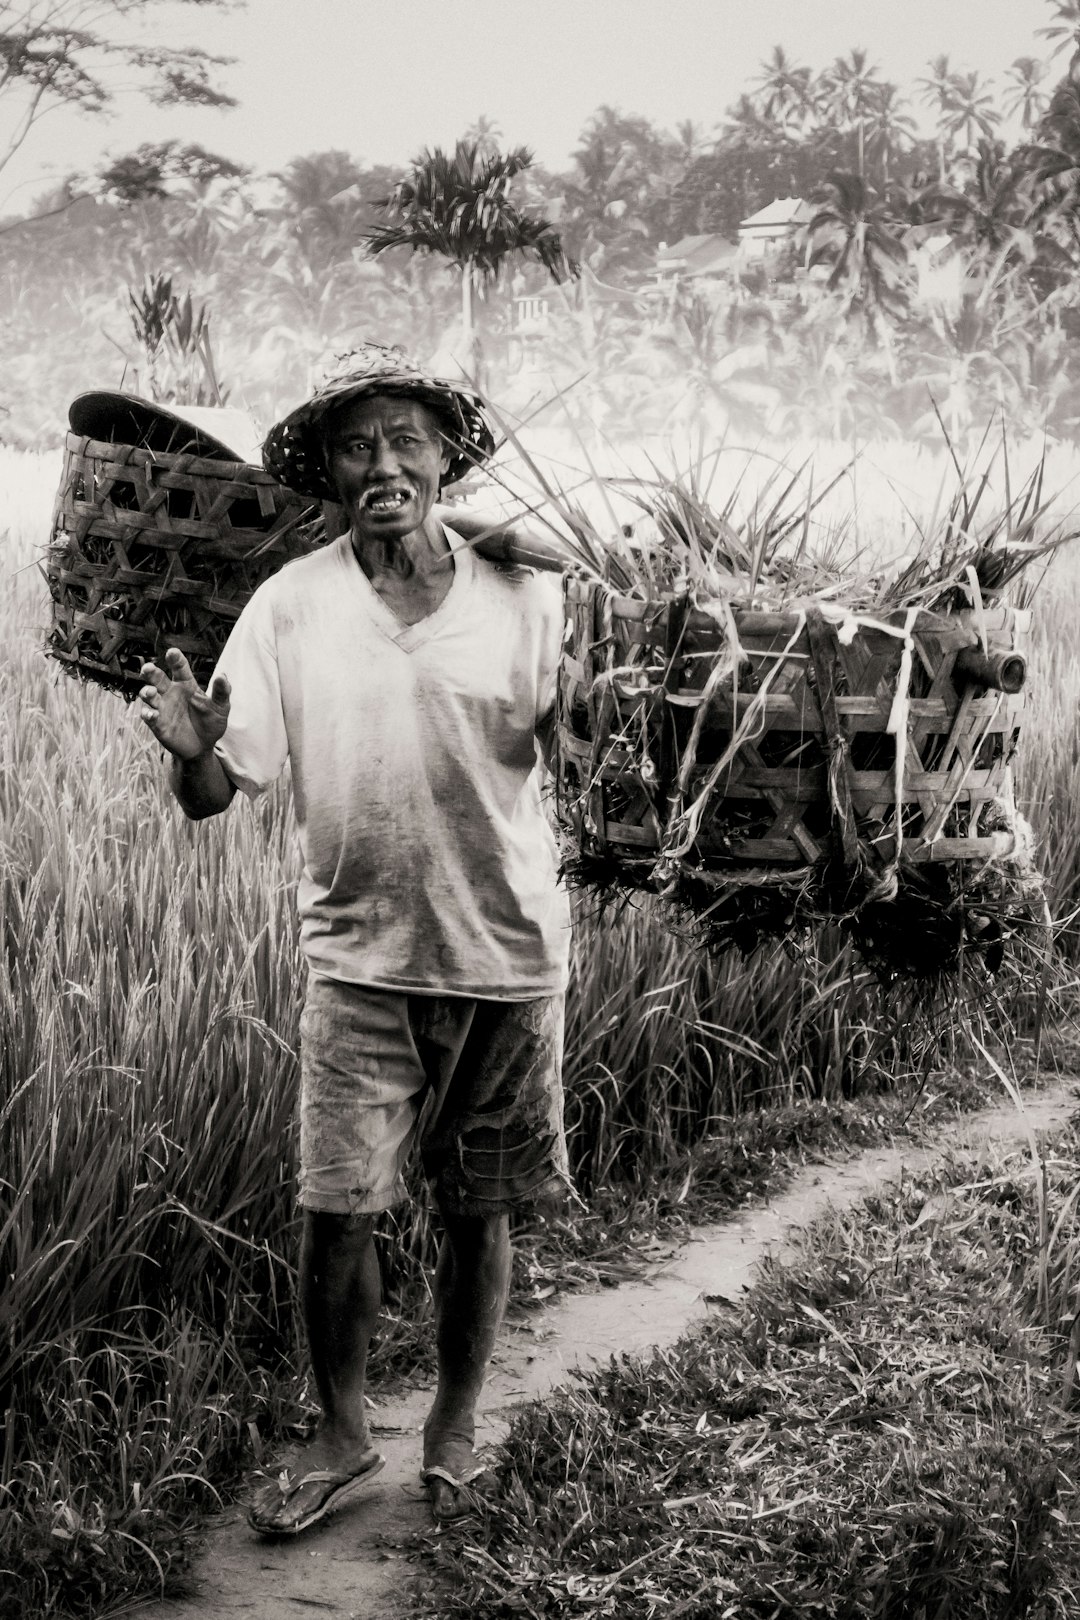 grayscale photography of man wearing V-neck t-shirt holding basket while standing near rice field